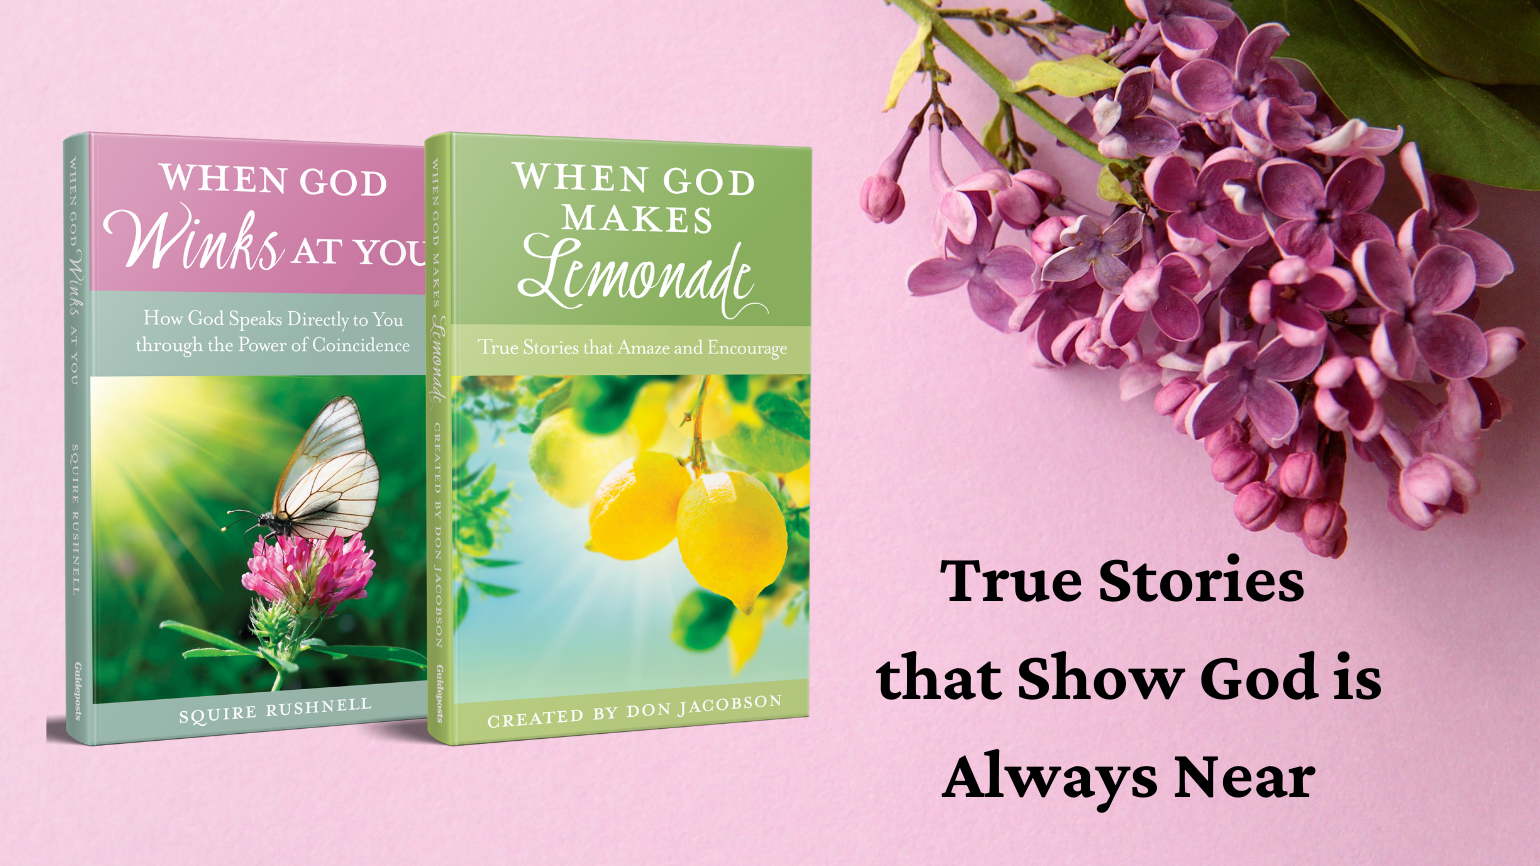 When God Winks at You (Guideposts) spiritual faith based mothers day gifts